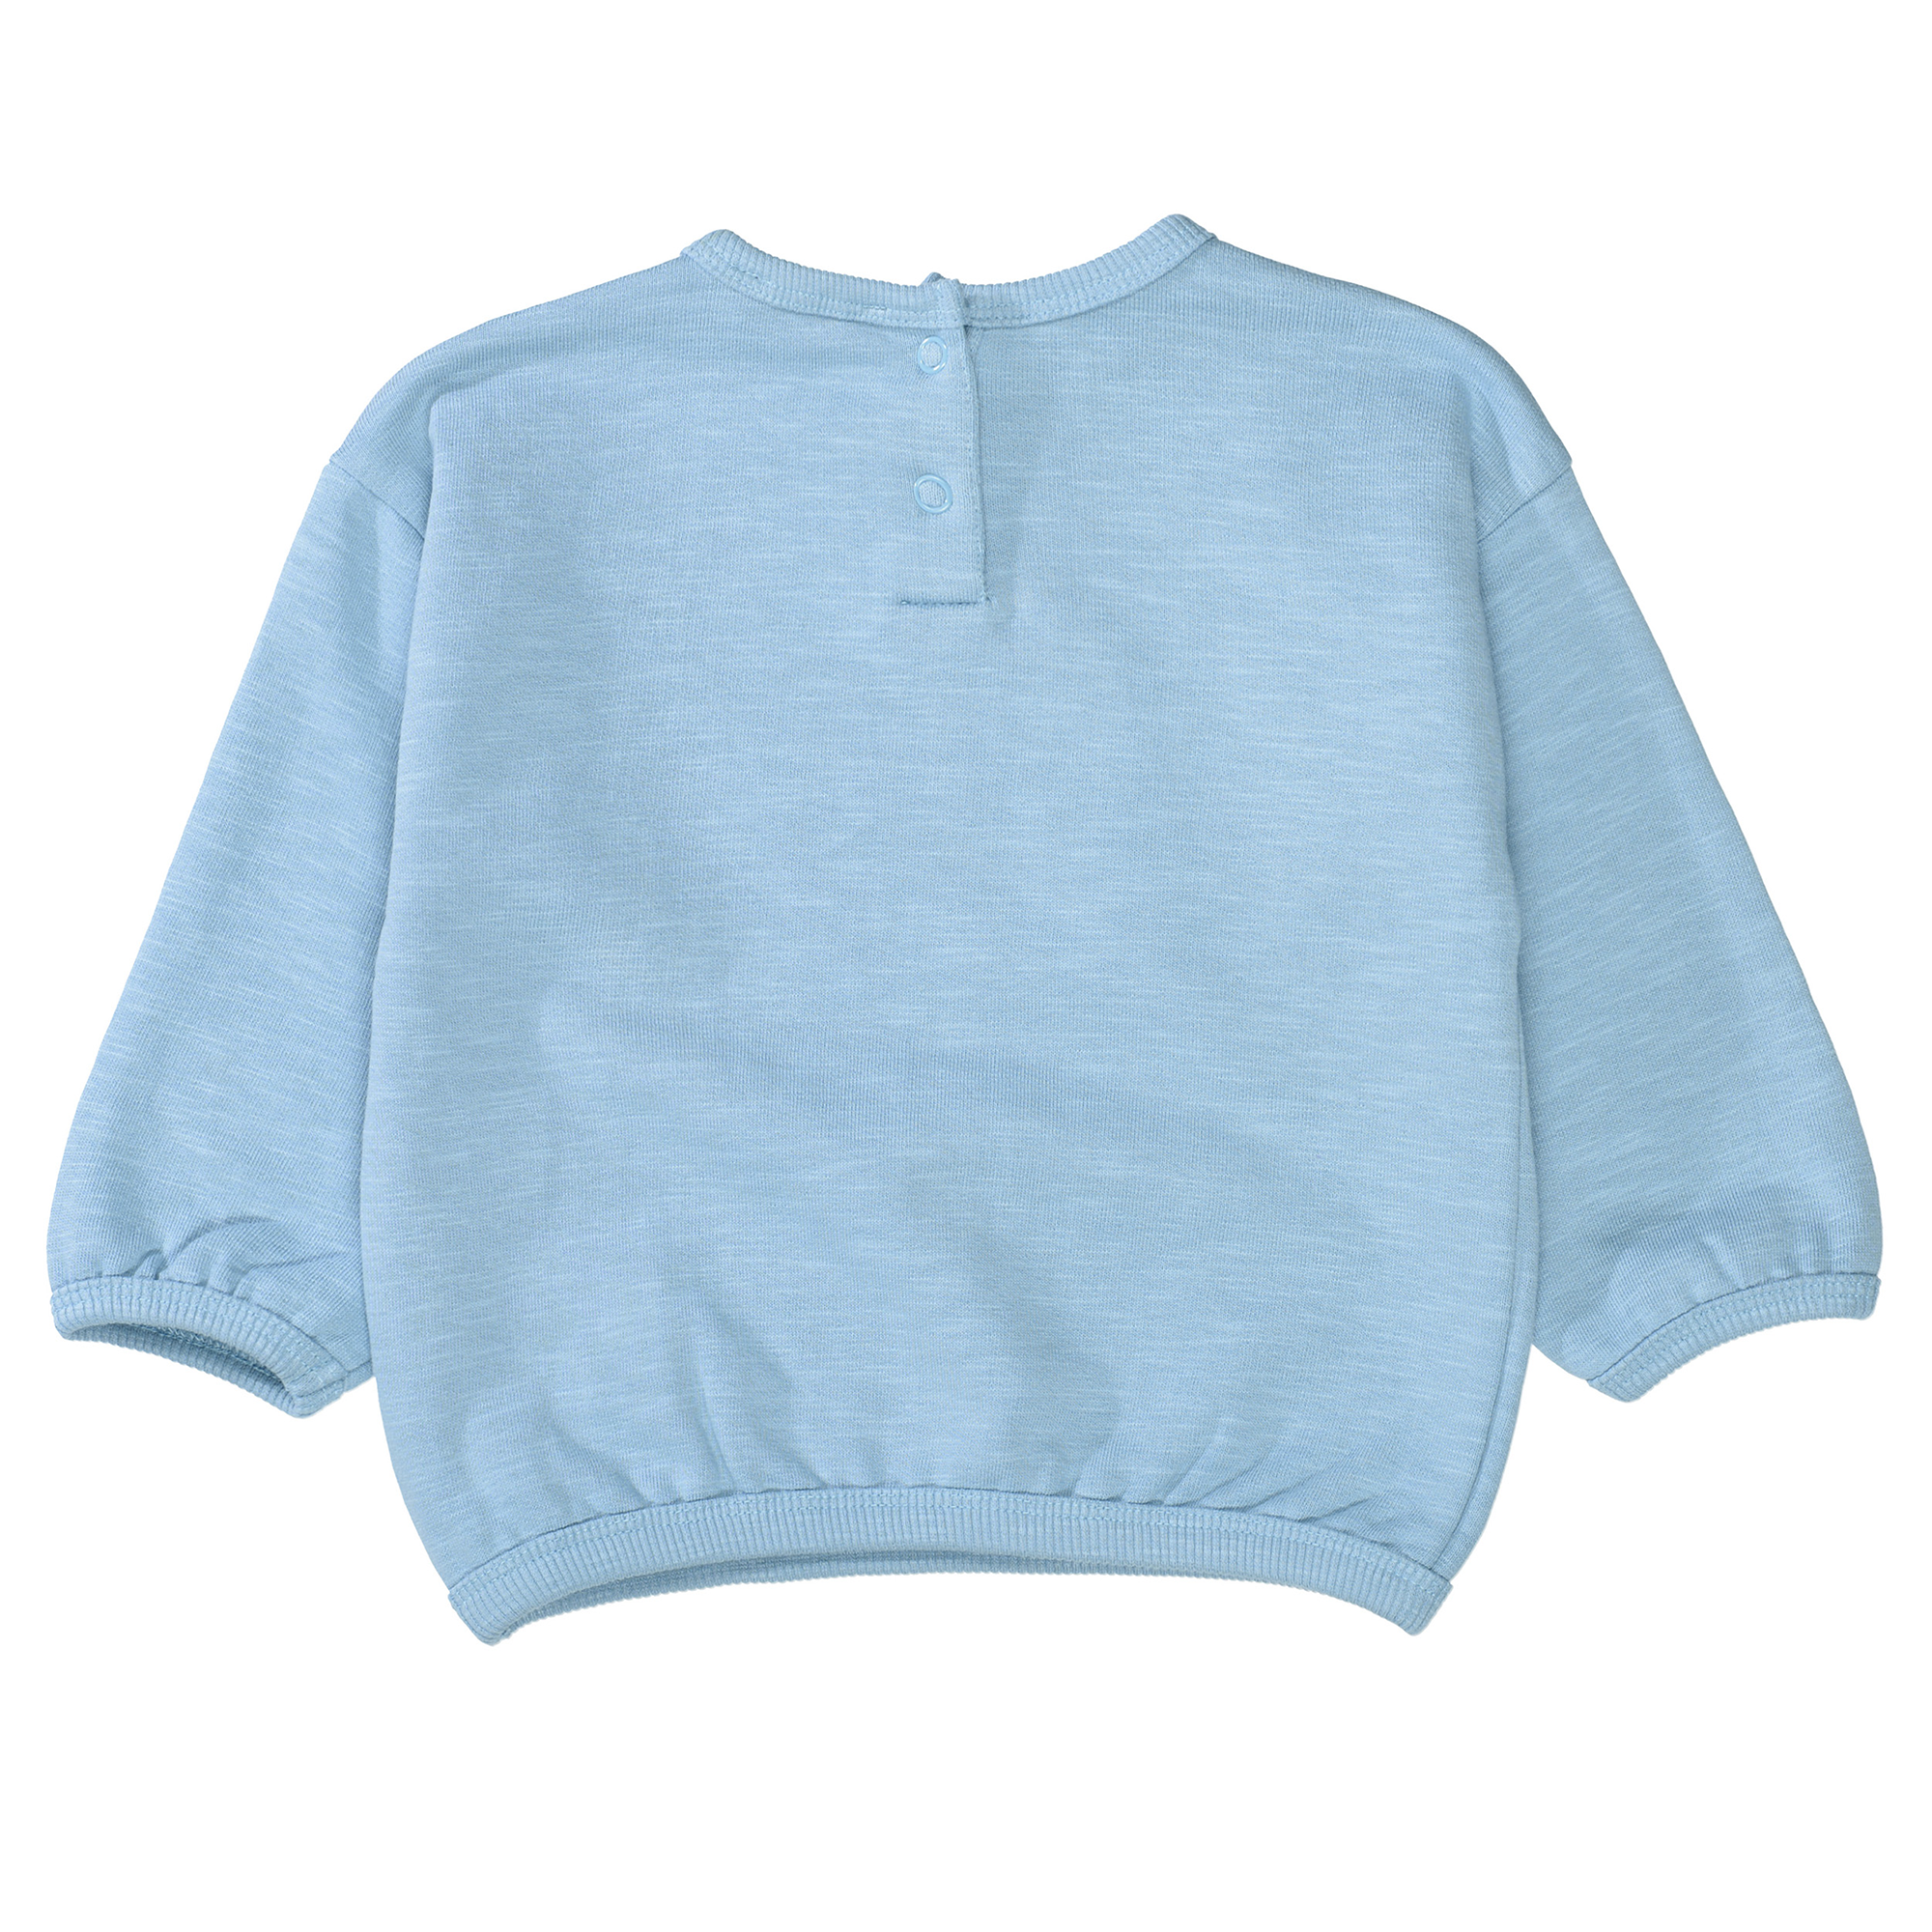 Sweatshirt Let's Hang Out STACCATO Blau M2000585457303 2